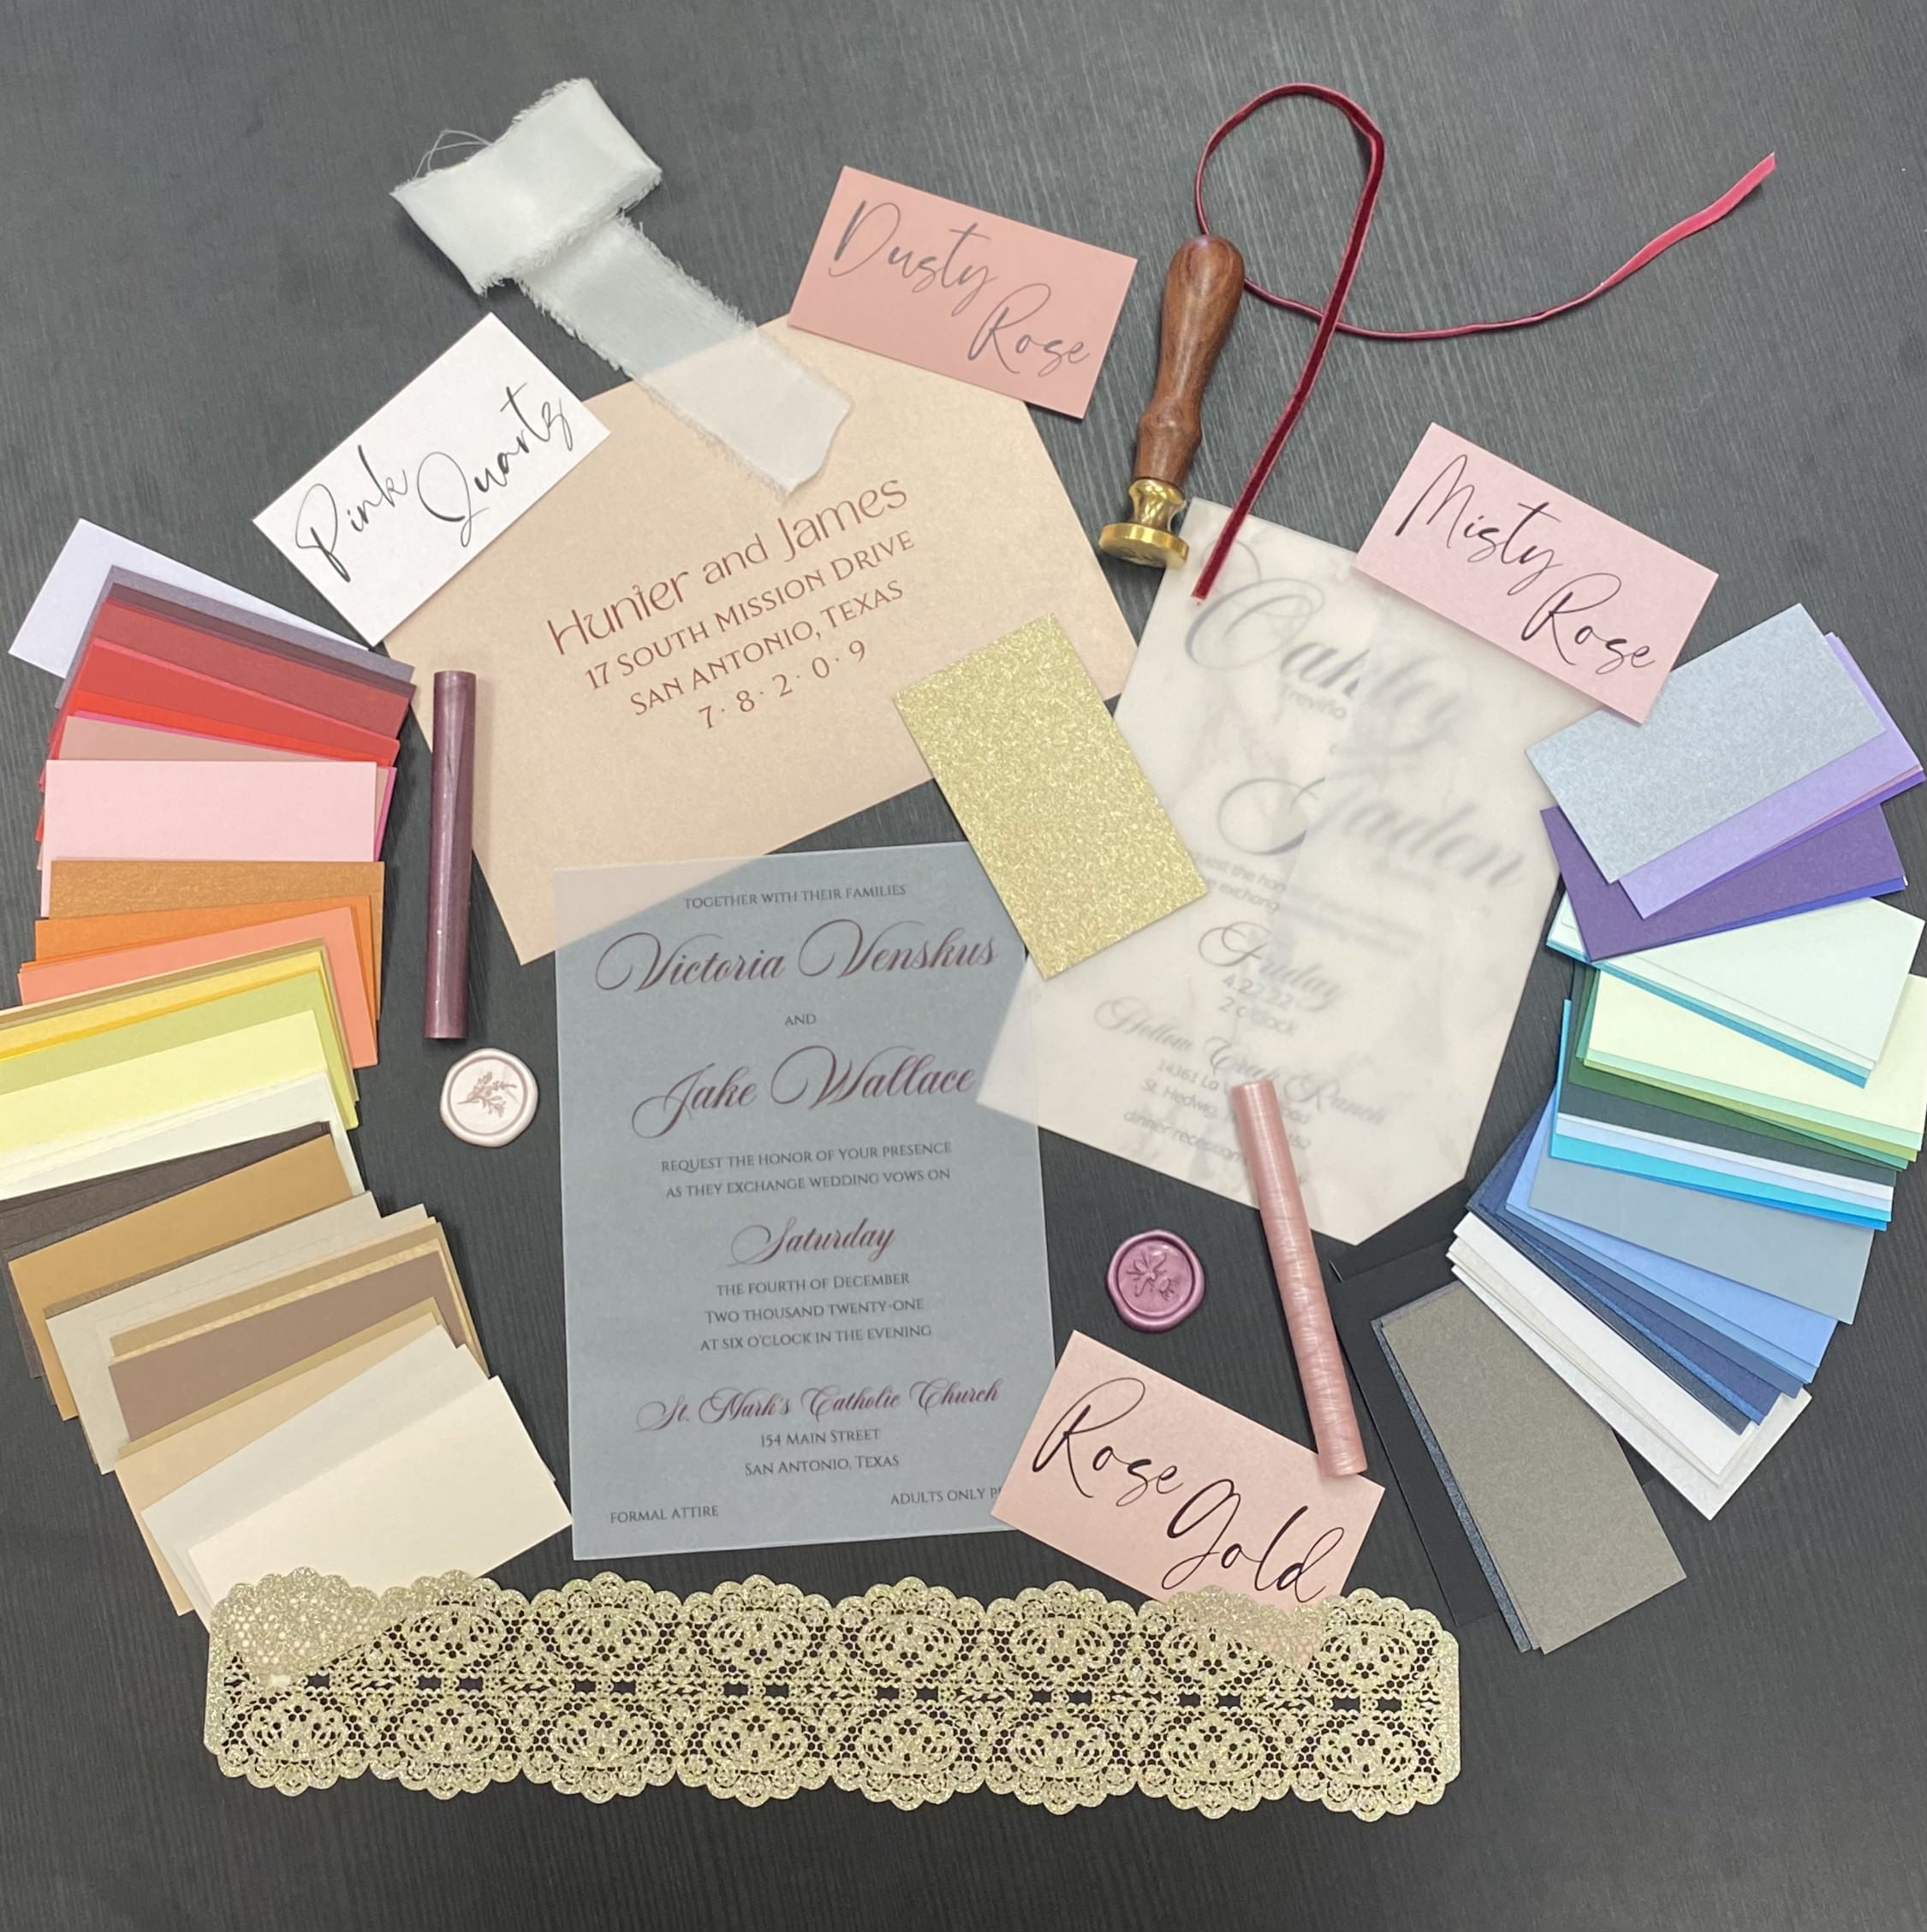 A diverse assortment of wedding invitations and stationery available in an array of vibrant colors, catering specifically to brides and grooms in San Antonio, Texas.